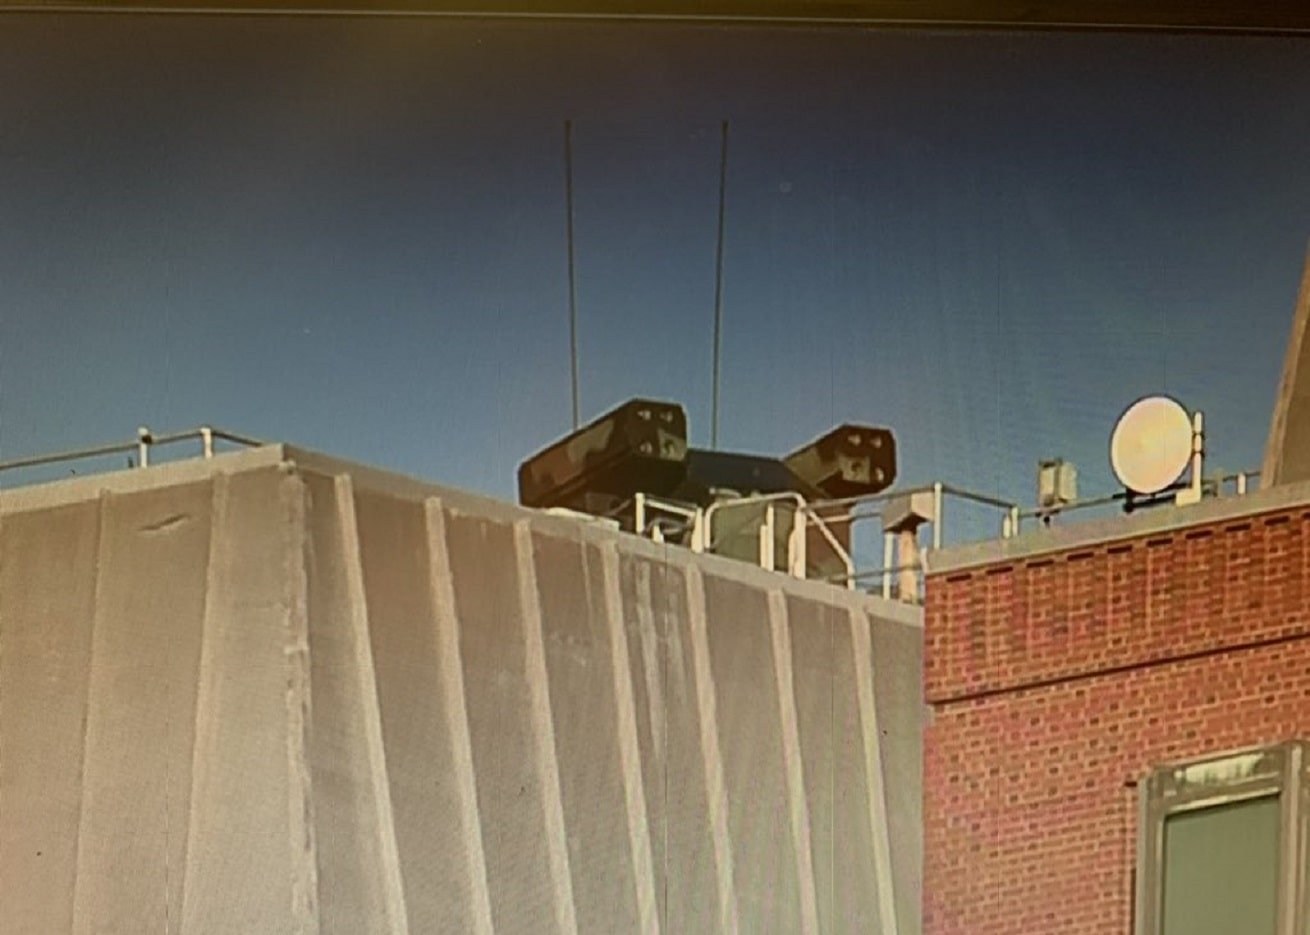 “Mystery” missile battery spotted on roof of building across street from White House